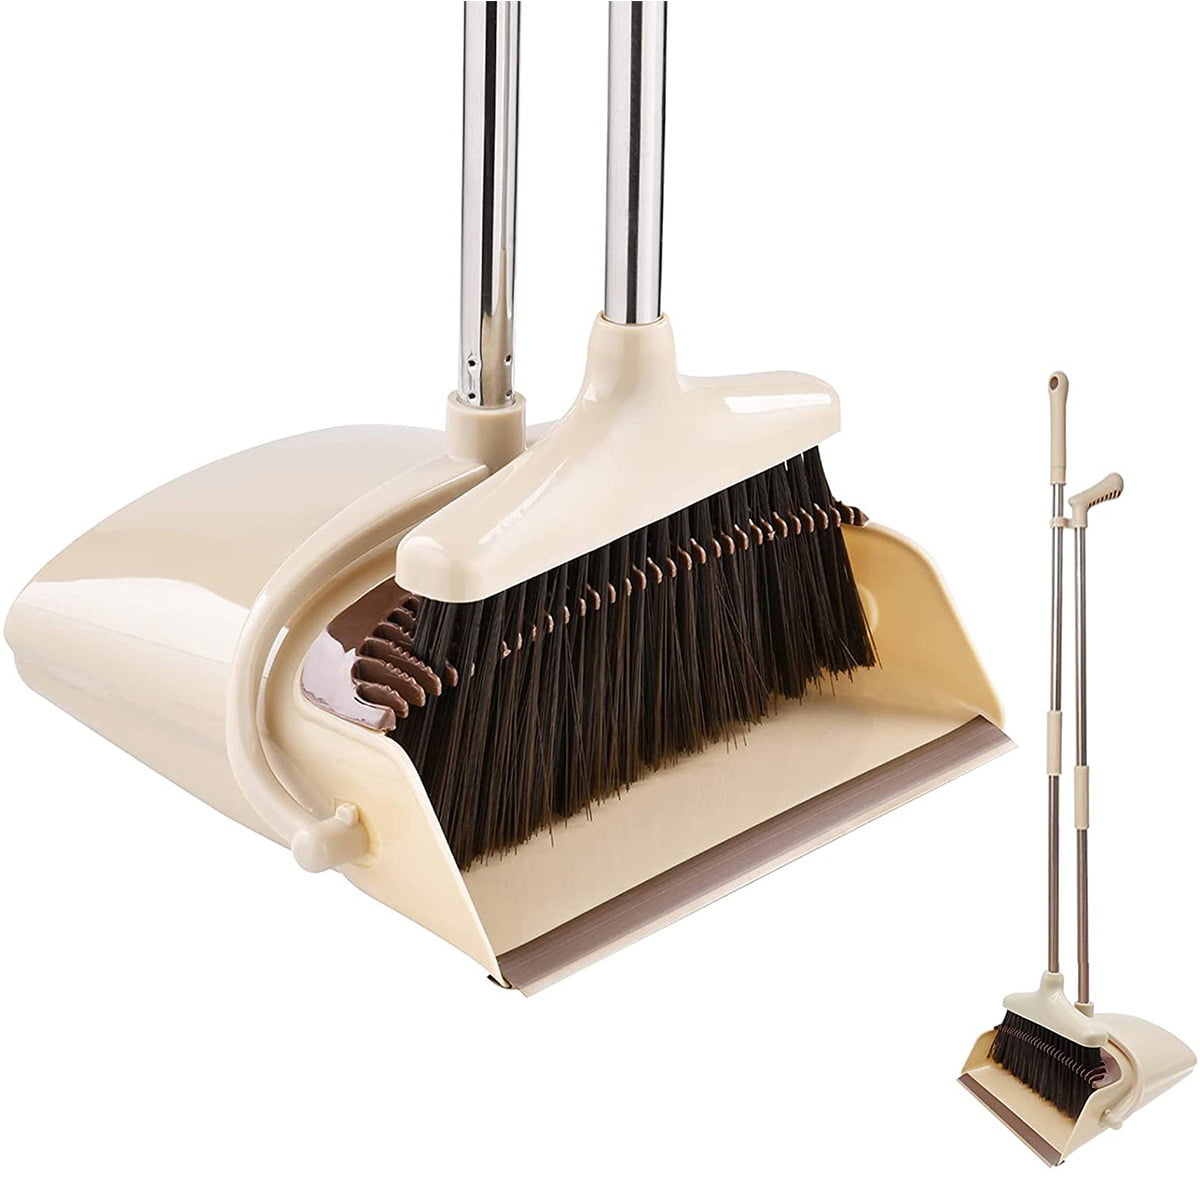 Broom Dustpan Set Standing with Adjustable Long Handle Rotating Head Cleaning 